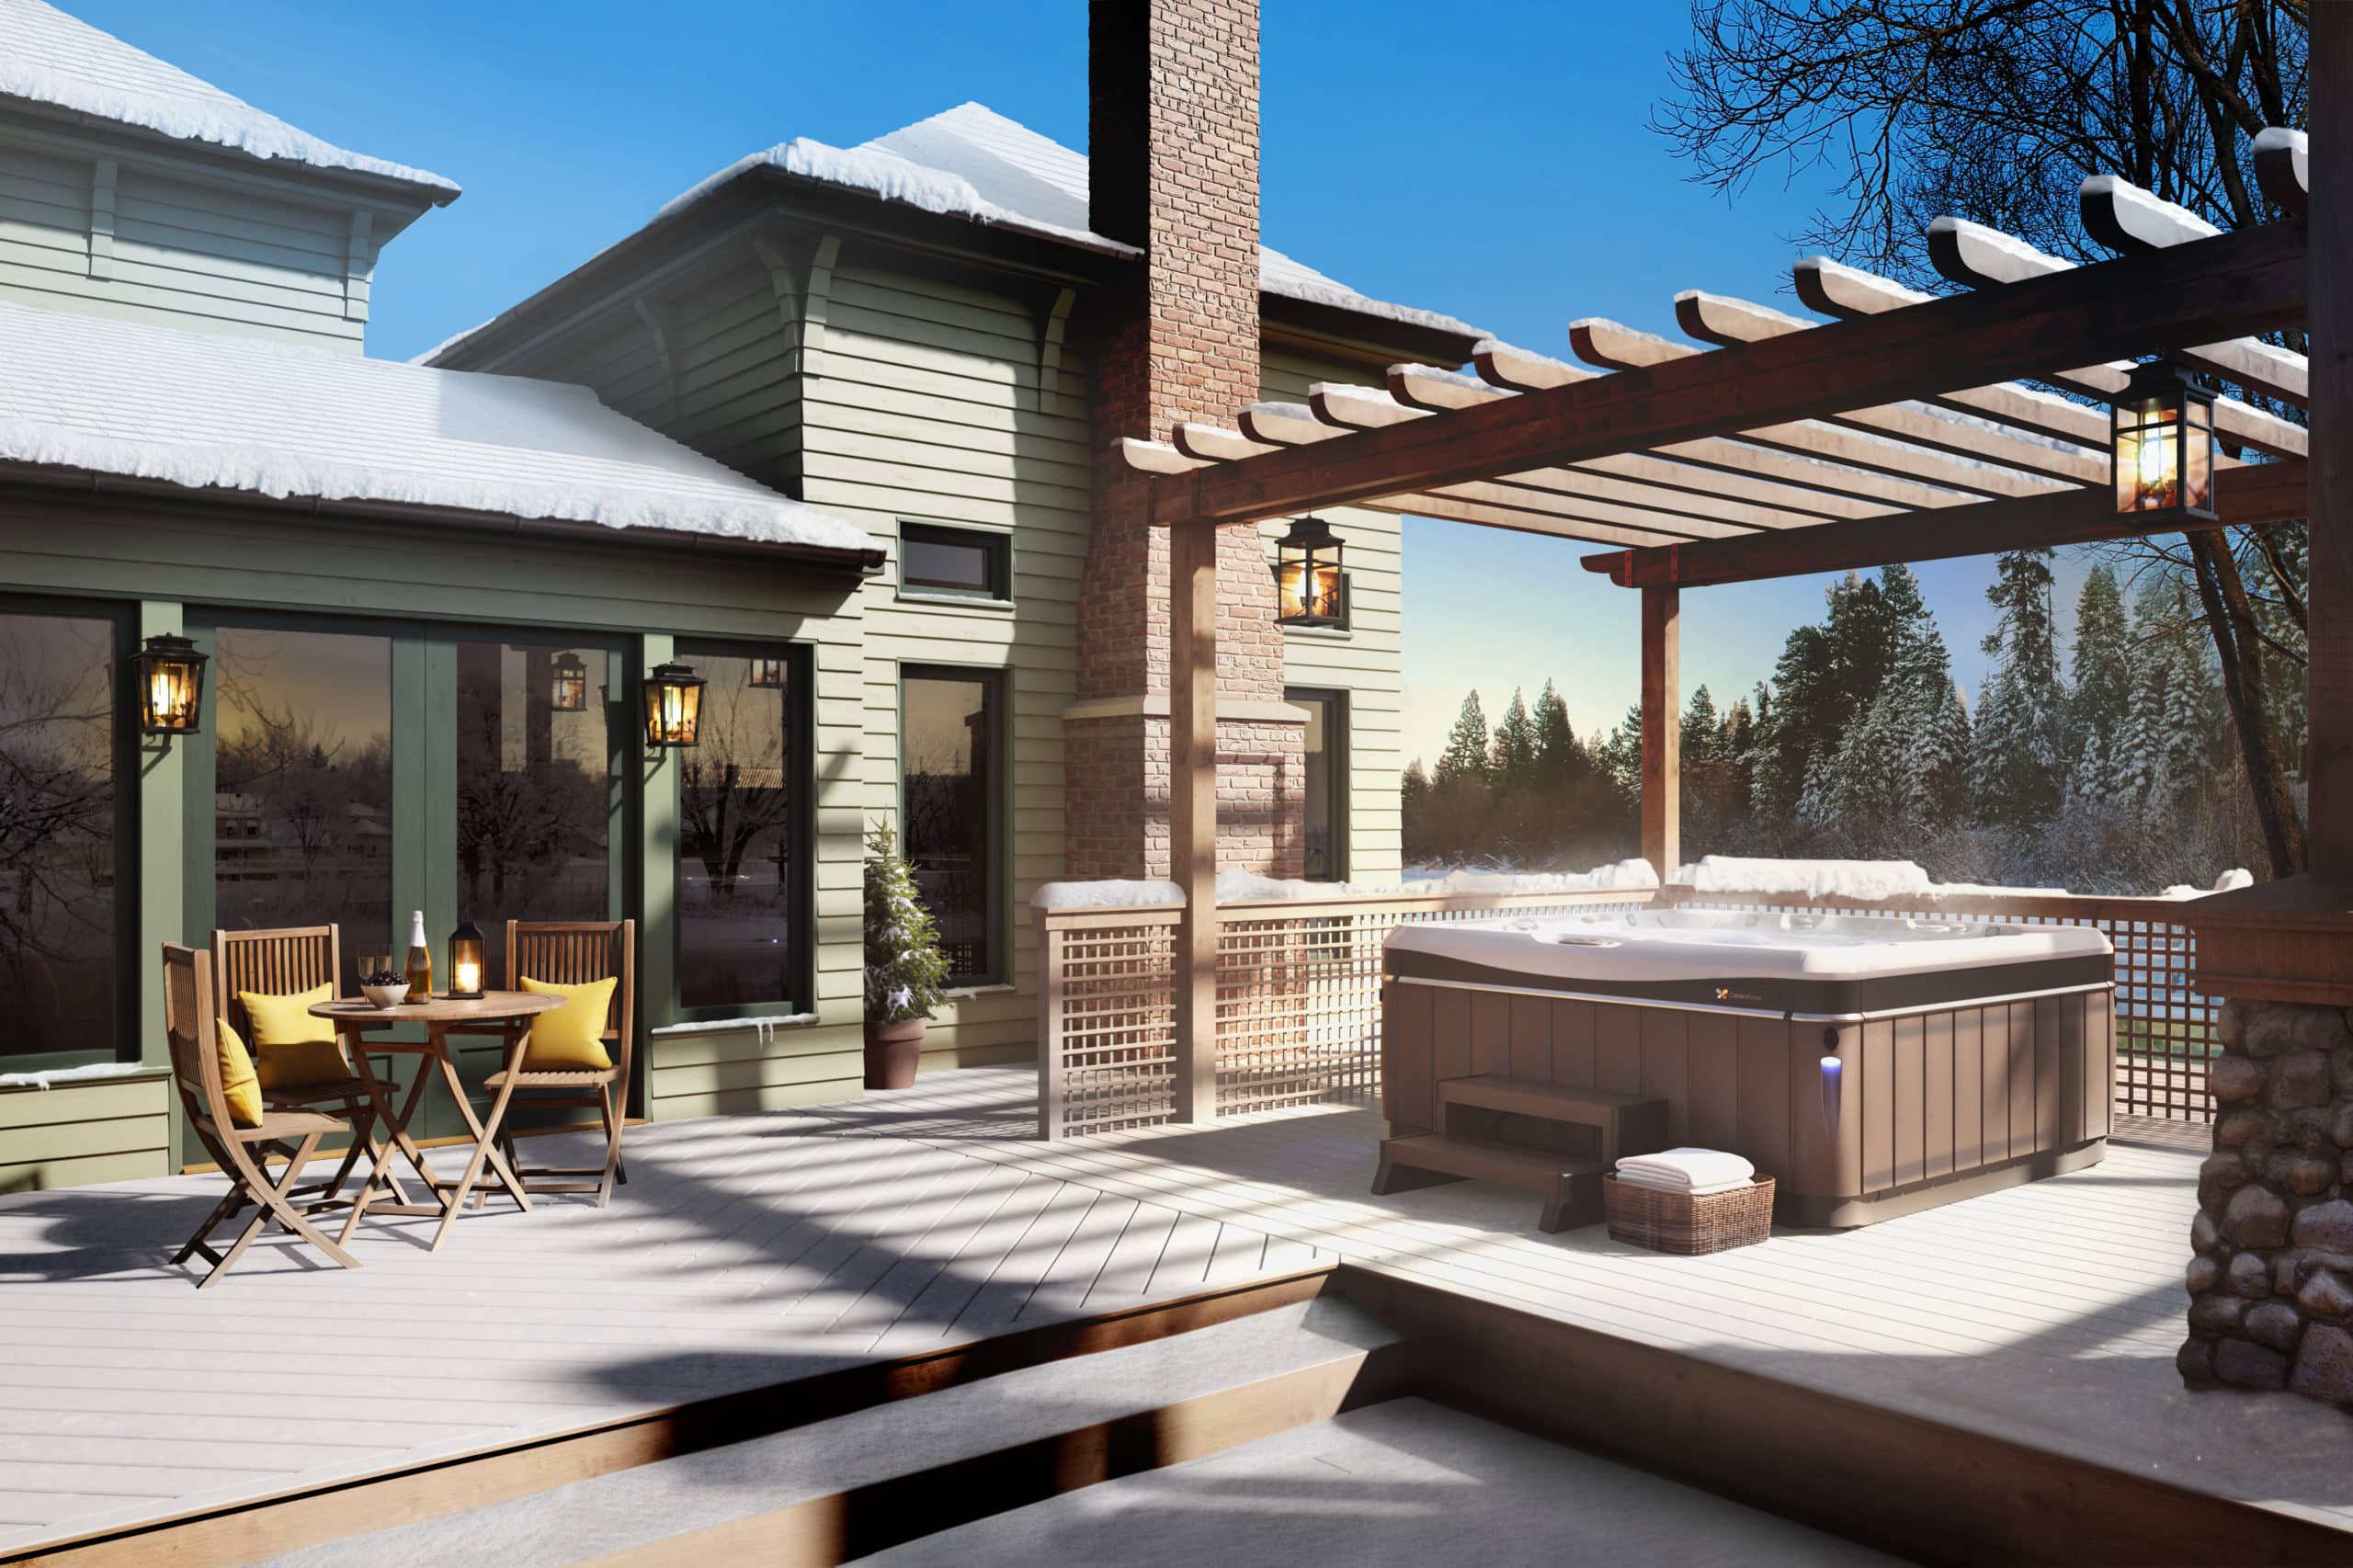 How much does a hot tub cost in 2022?